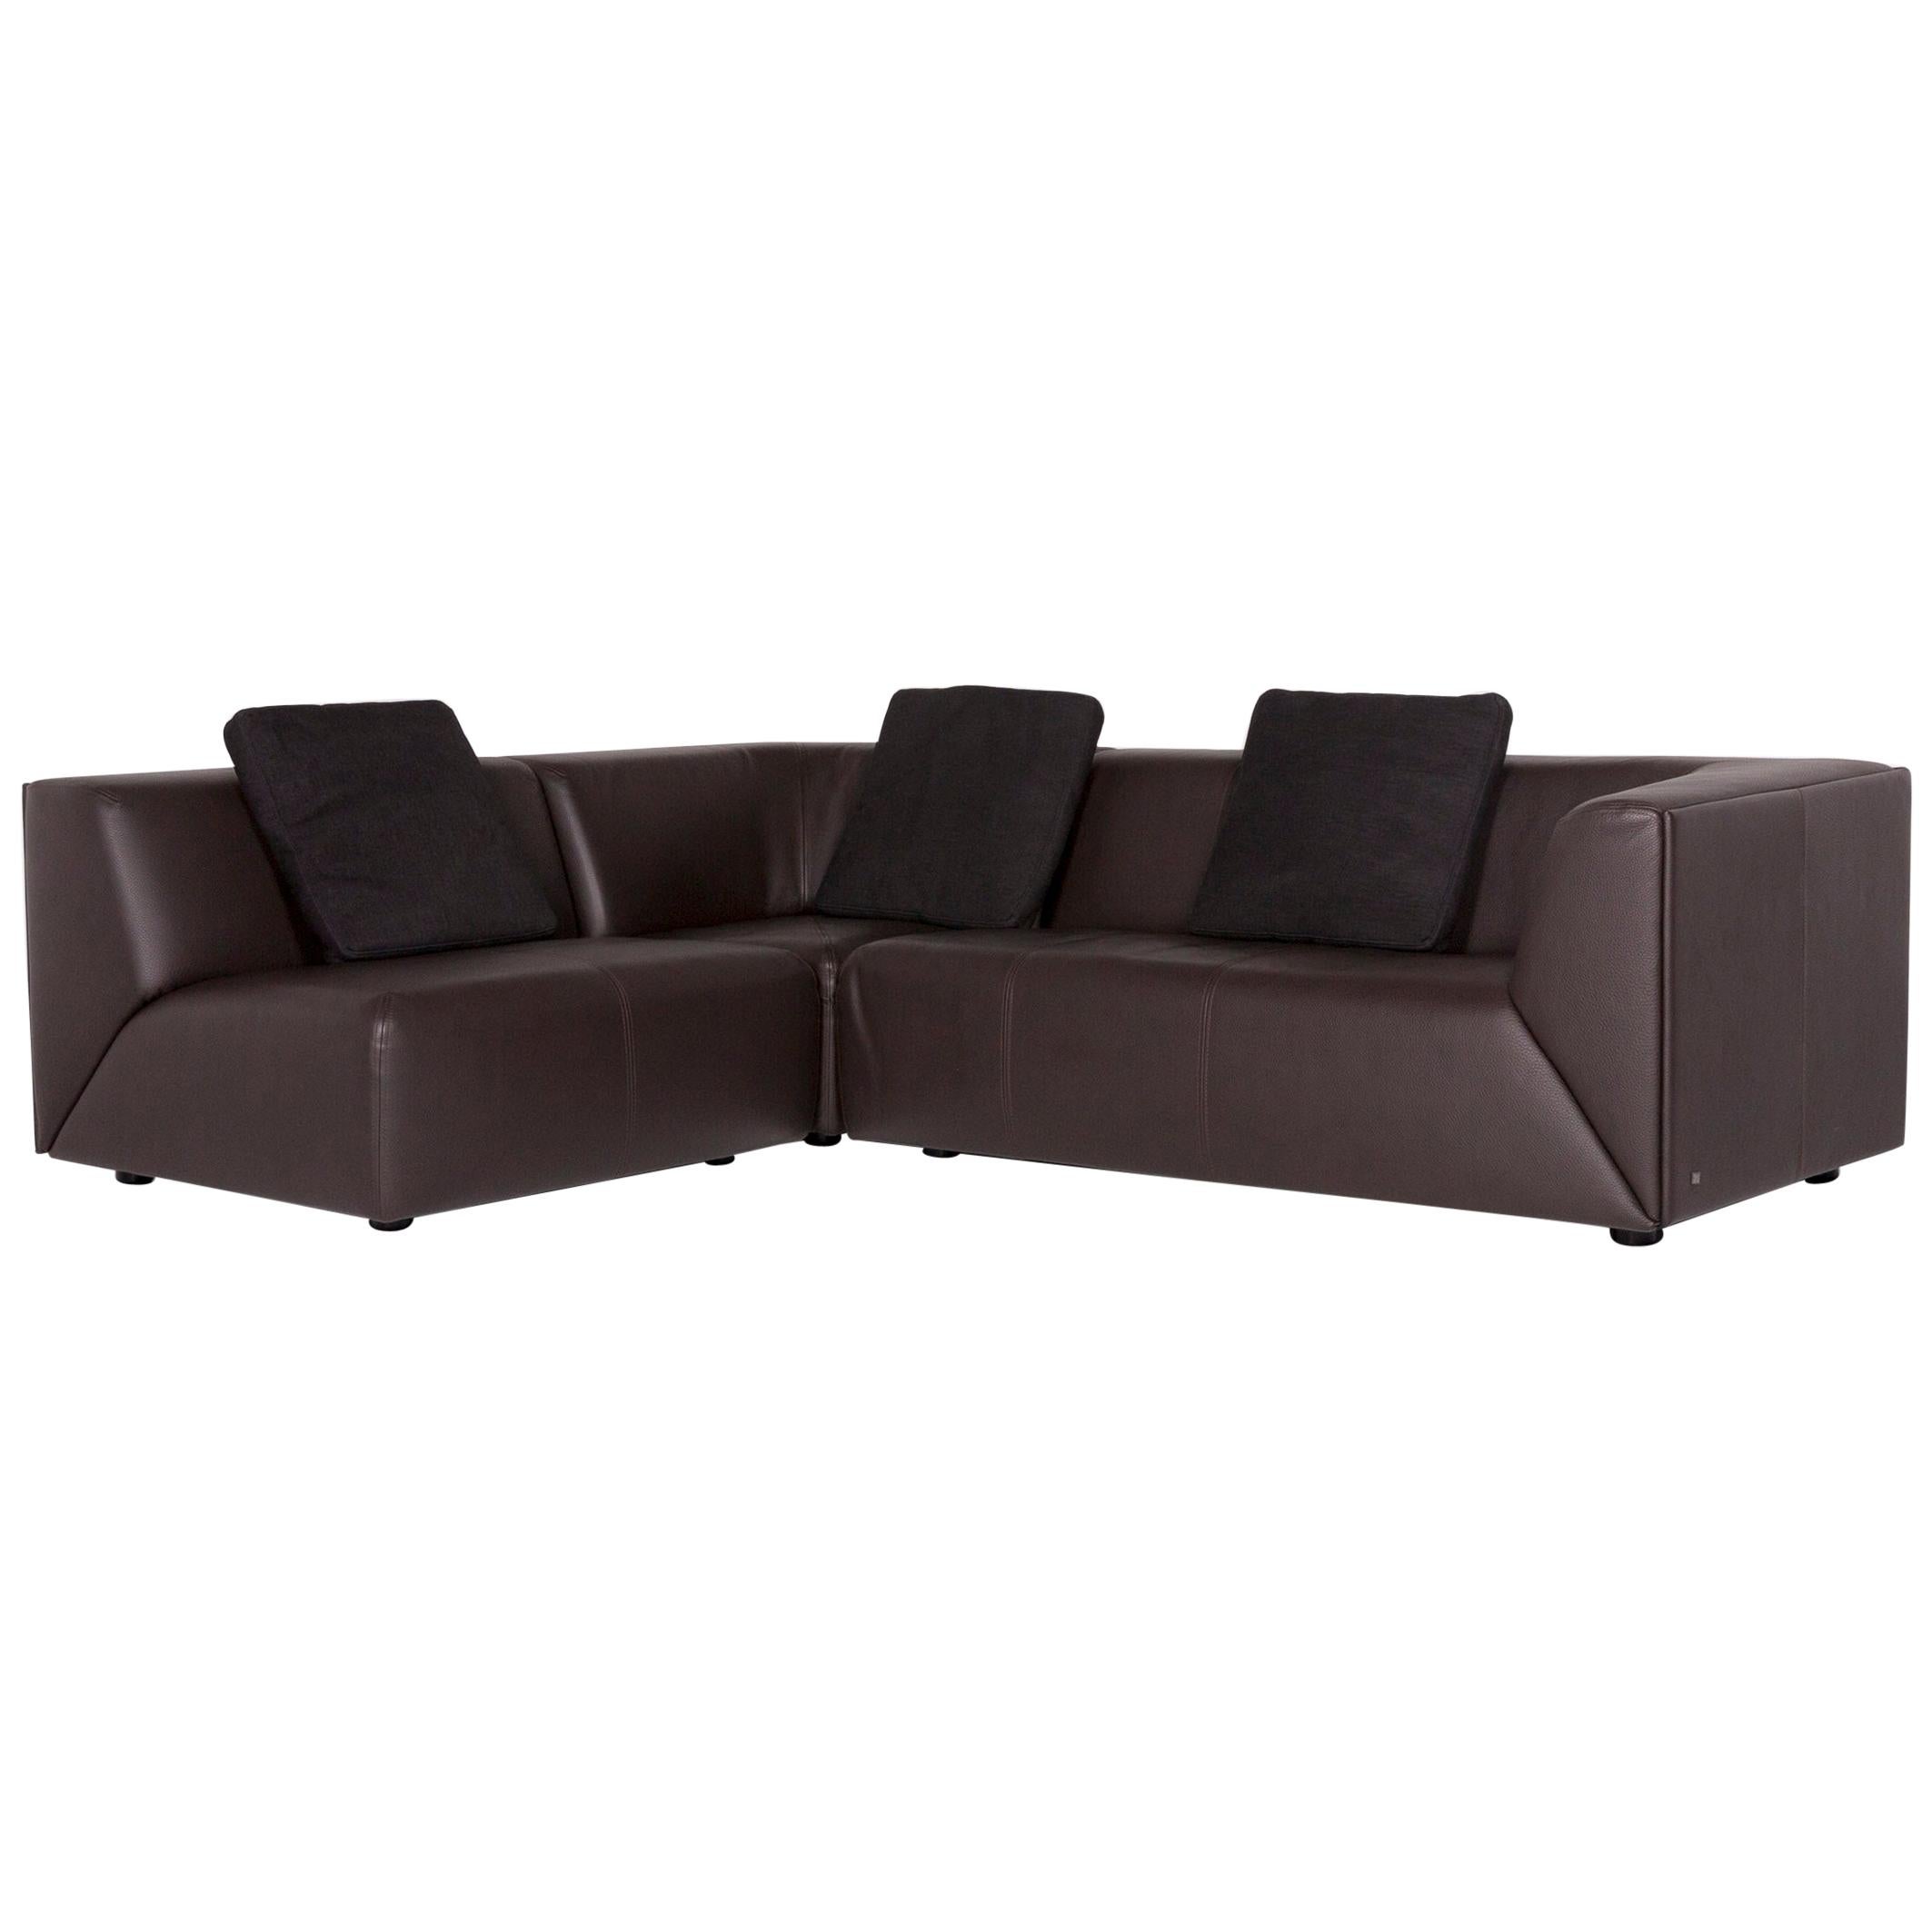 Rolf Benz Leather Corner Sofa Brown Dark Brown Sofa Couch For Sale